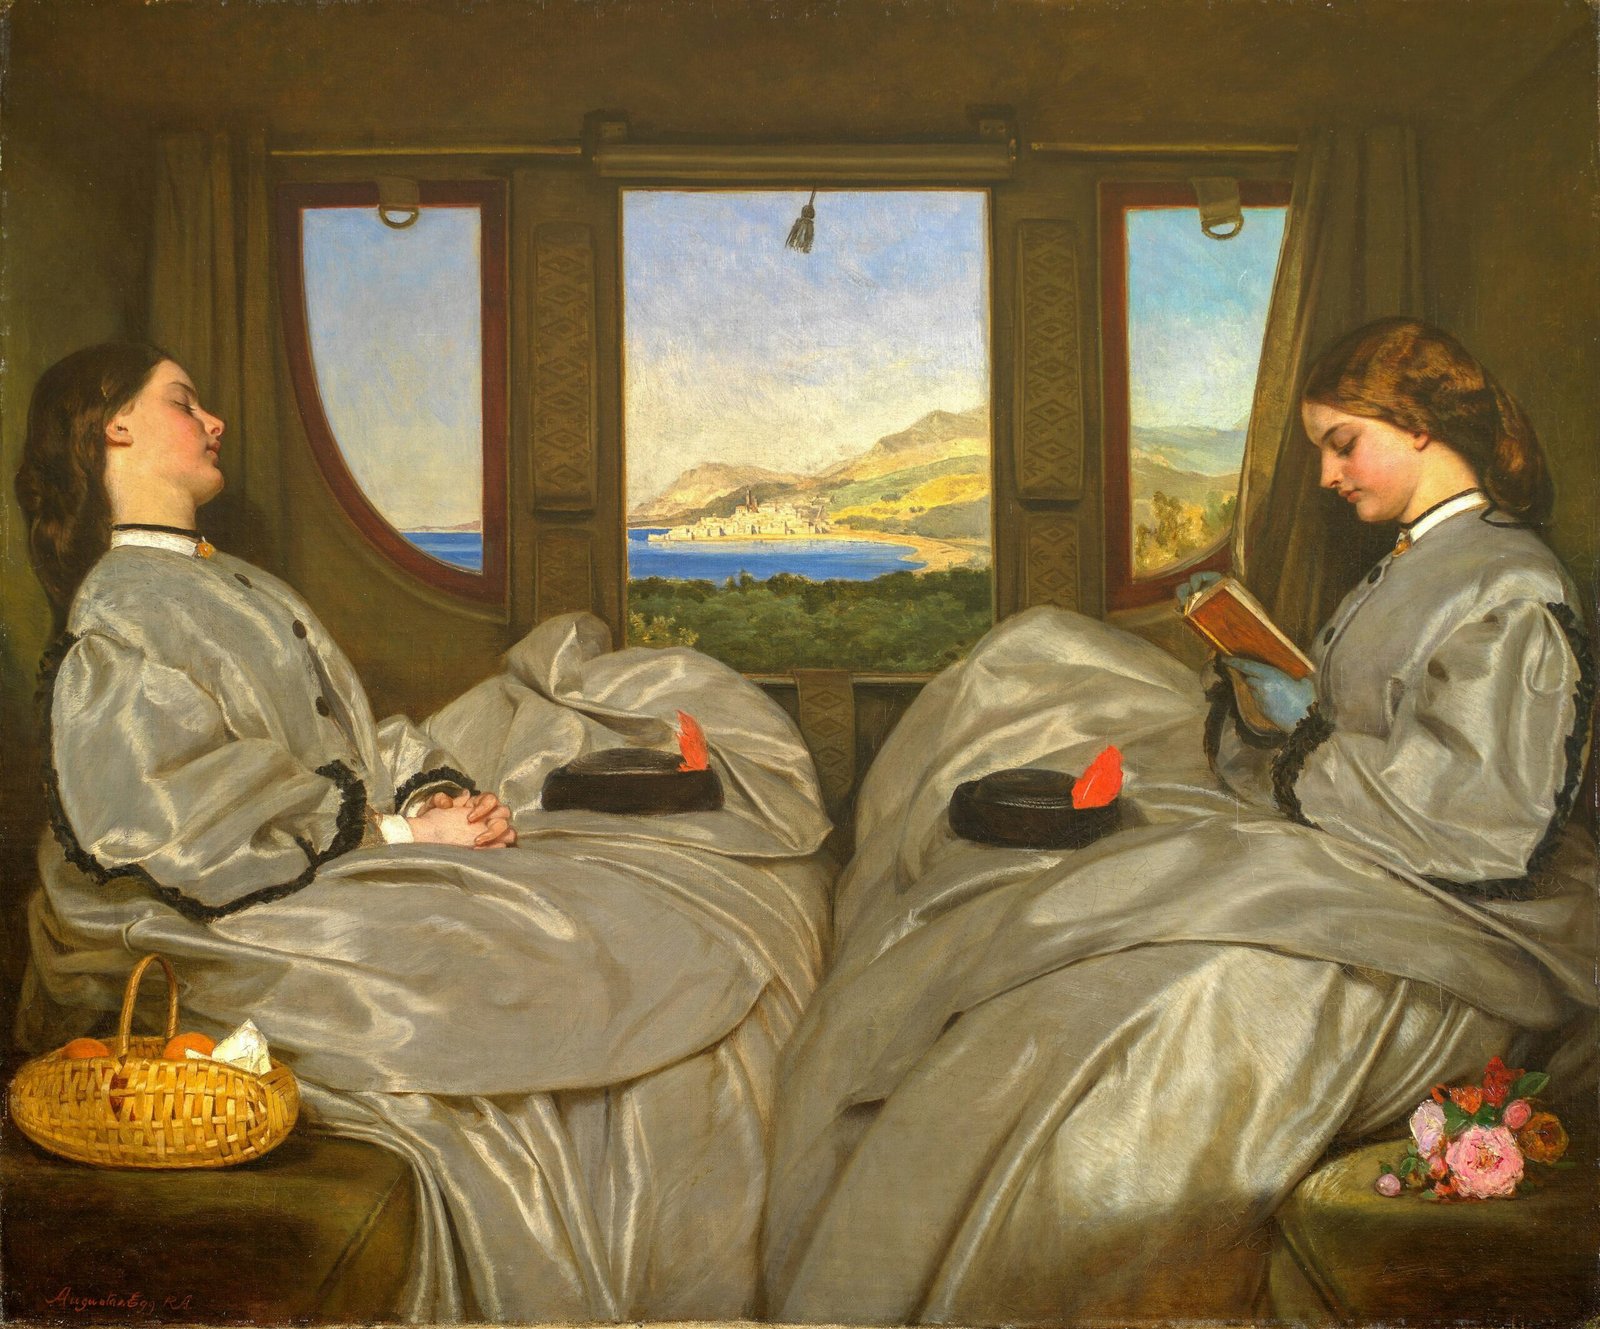 a painting of two women in bed looking out a window